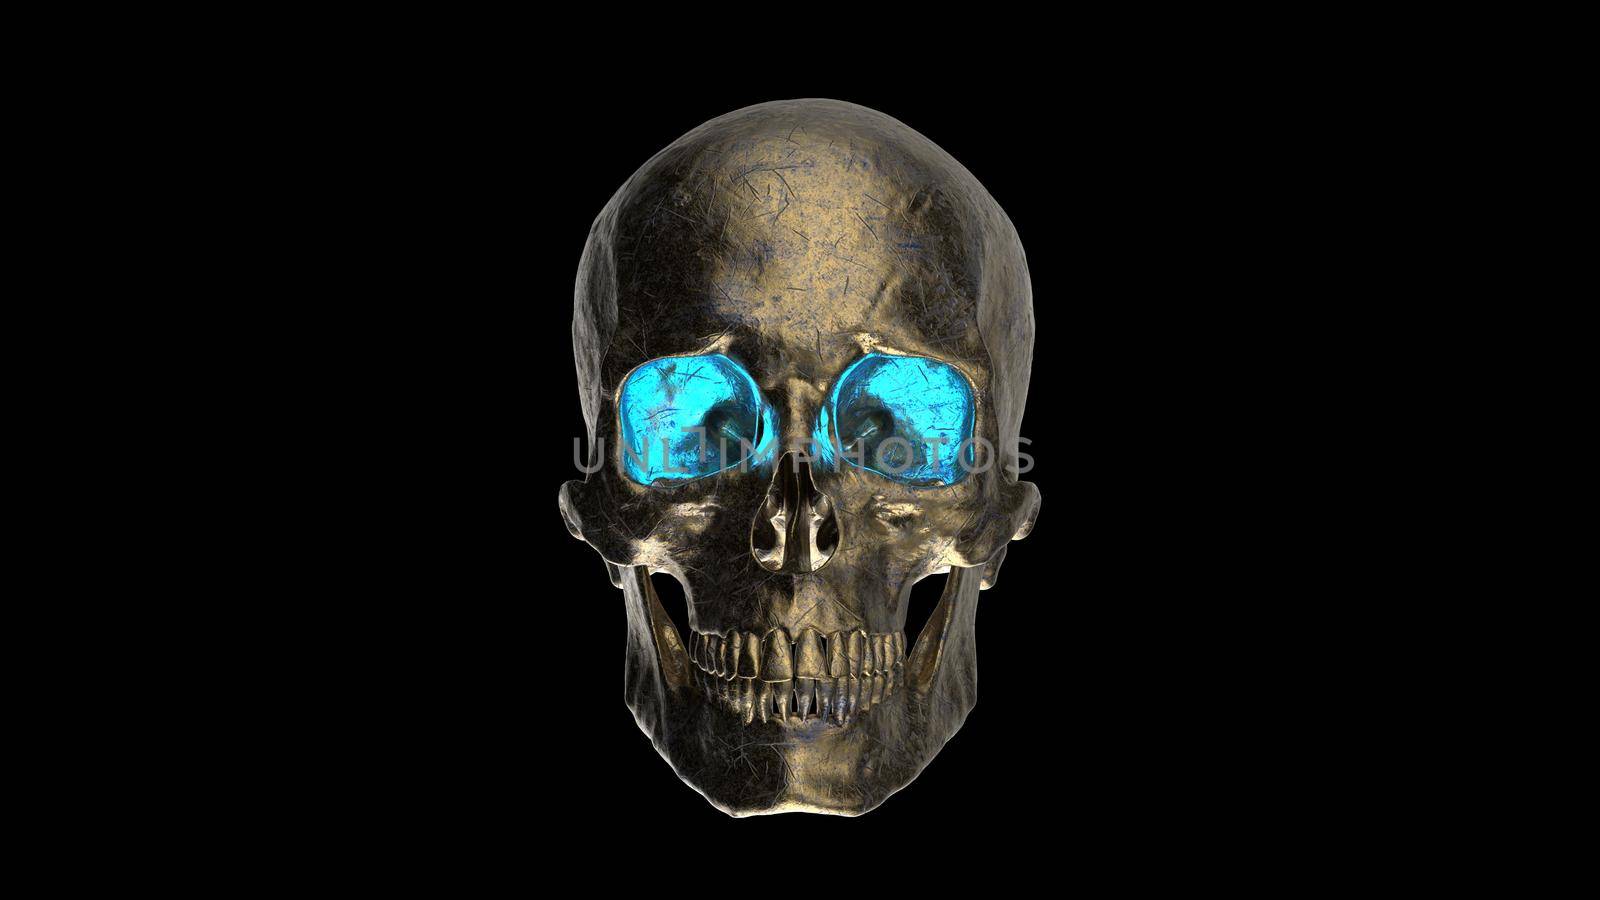 Old Bronze Human Skull with blue eyes and detailed reflections 3d render